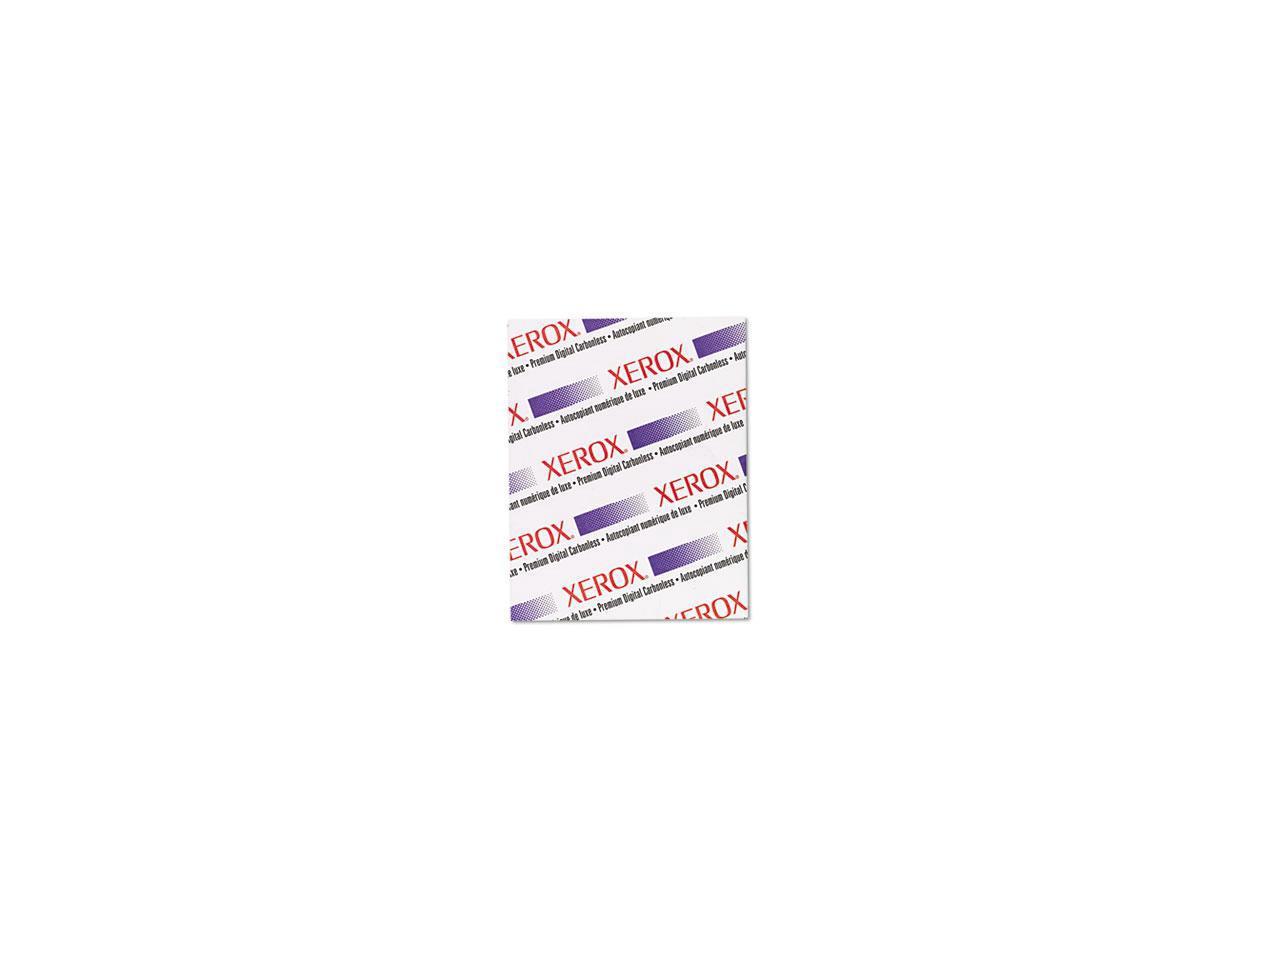 Xerox 3R12430 Premium Digital Carbonless Paper, 8-1/2 x11, White/Canary/Pink/Gldrod, 1250 Sets